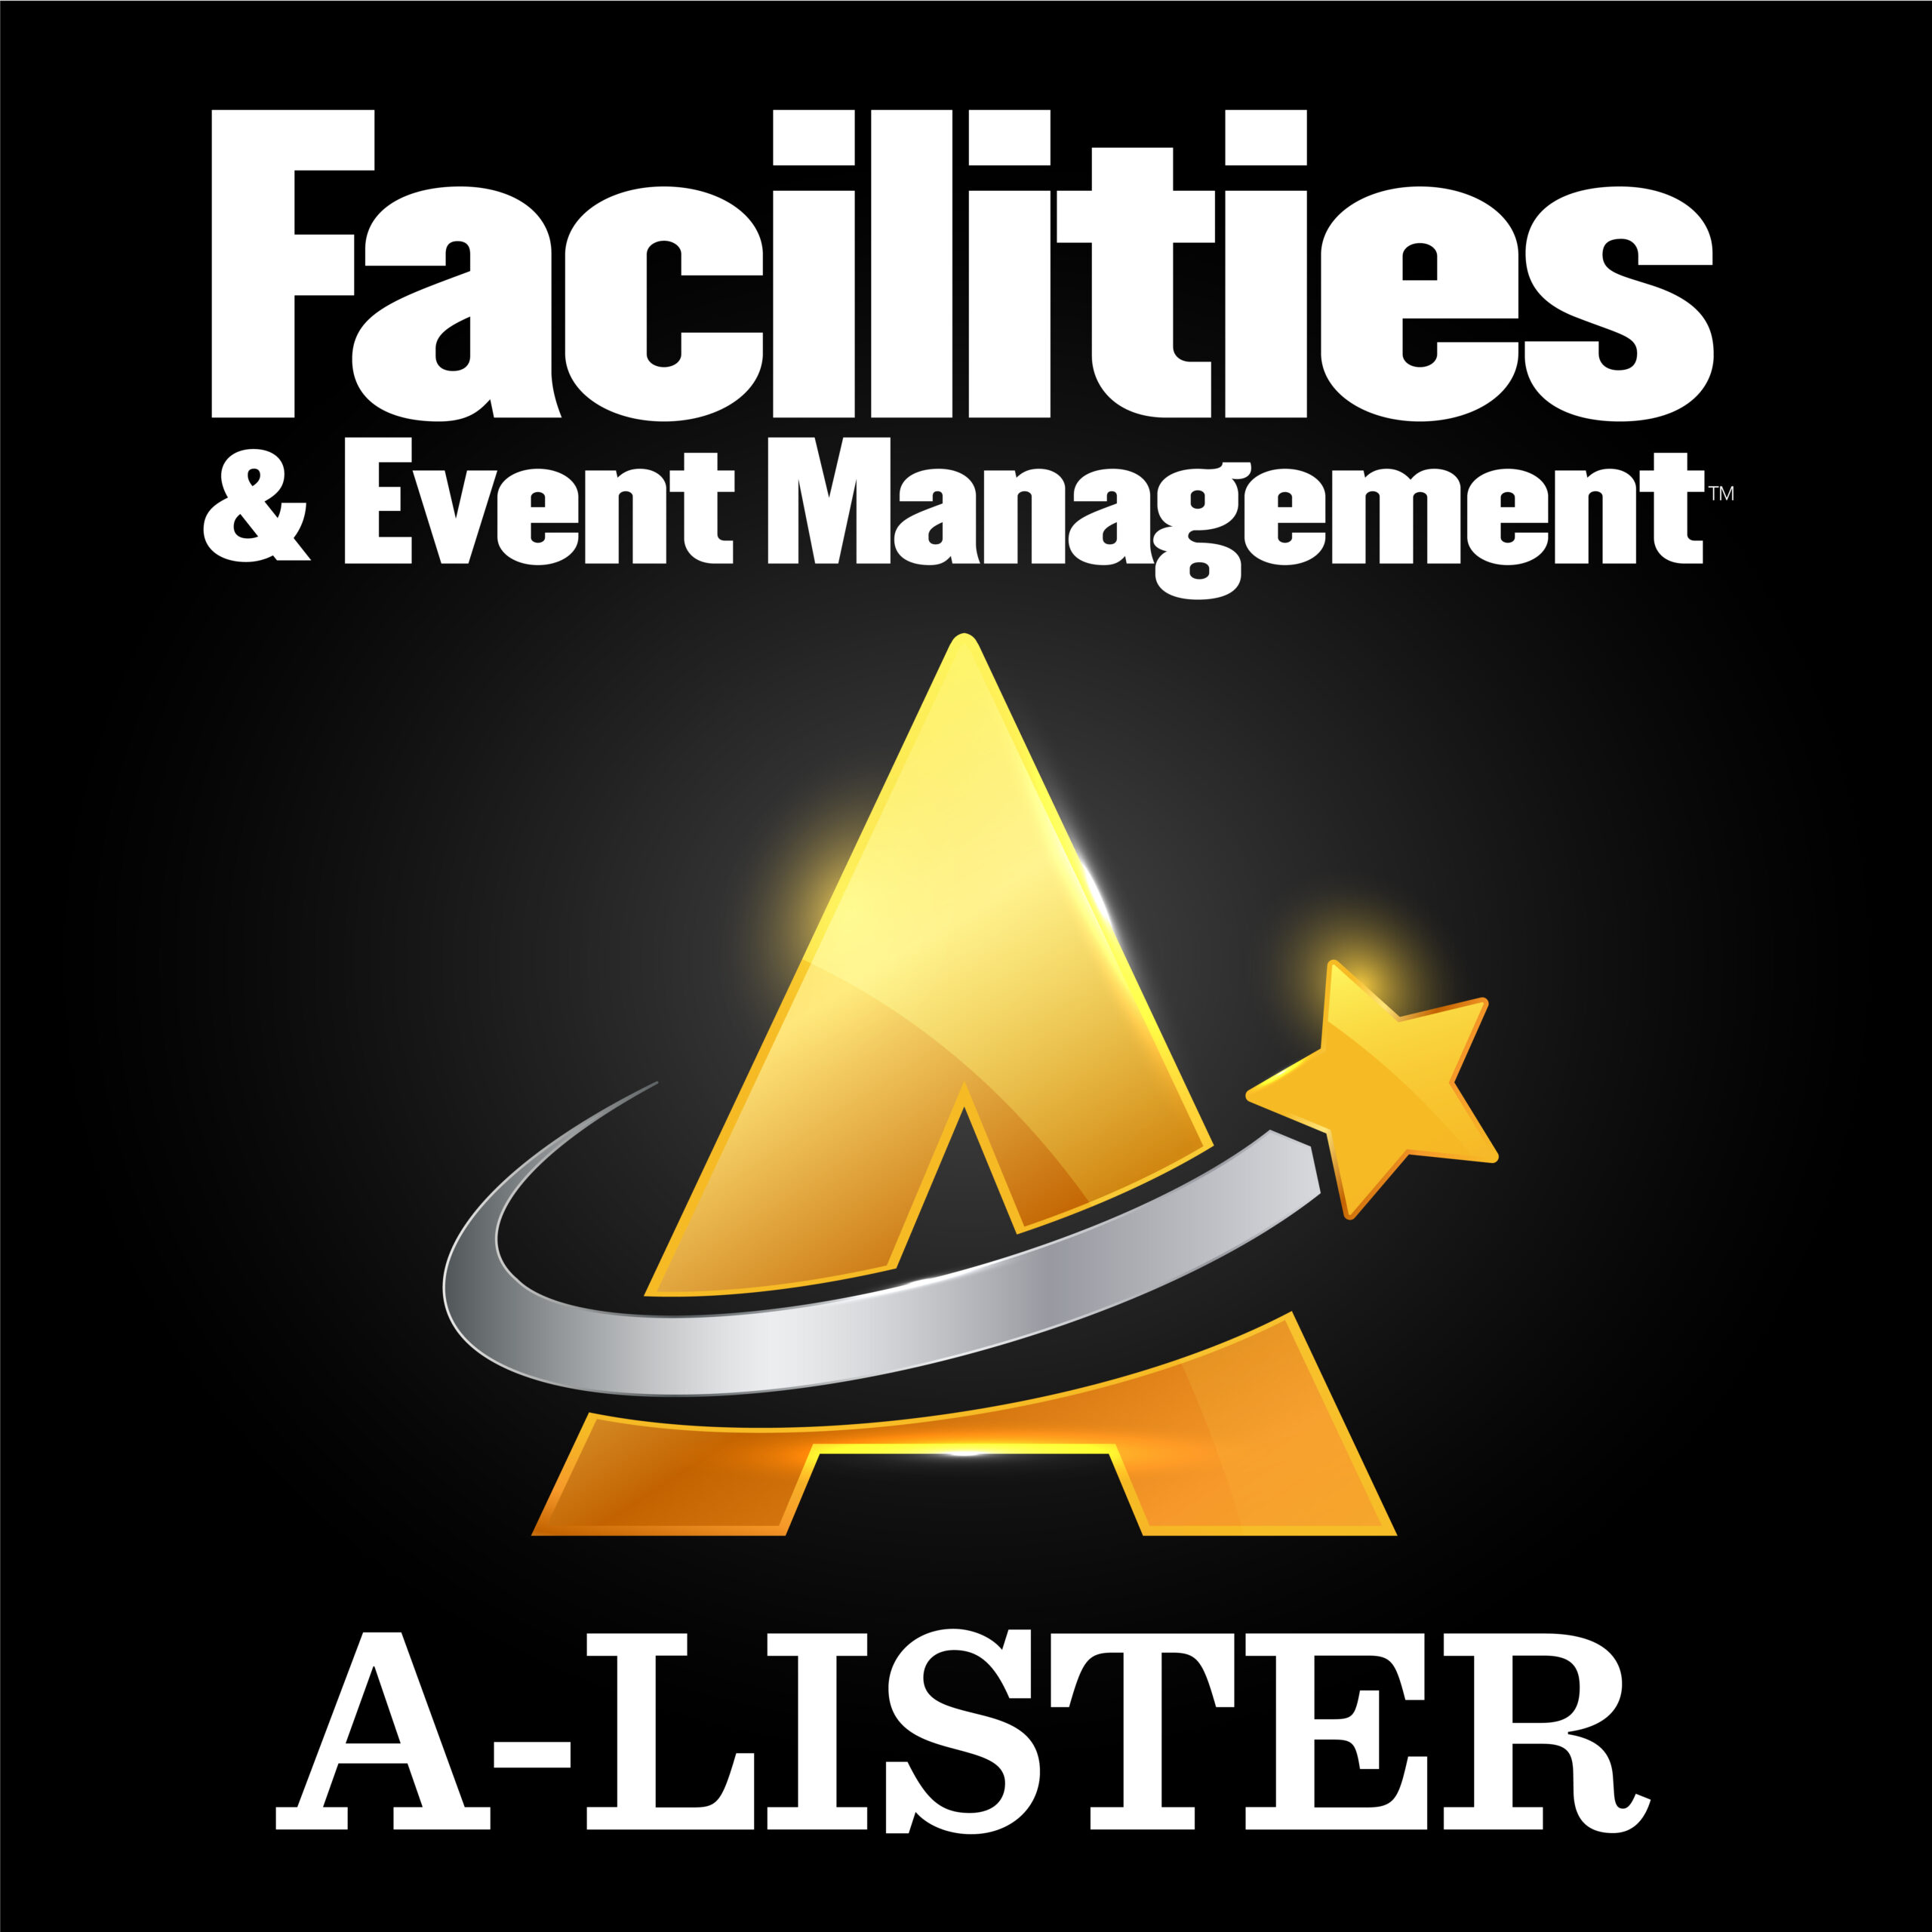 Facilities and Event Management